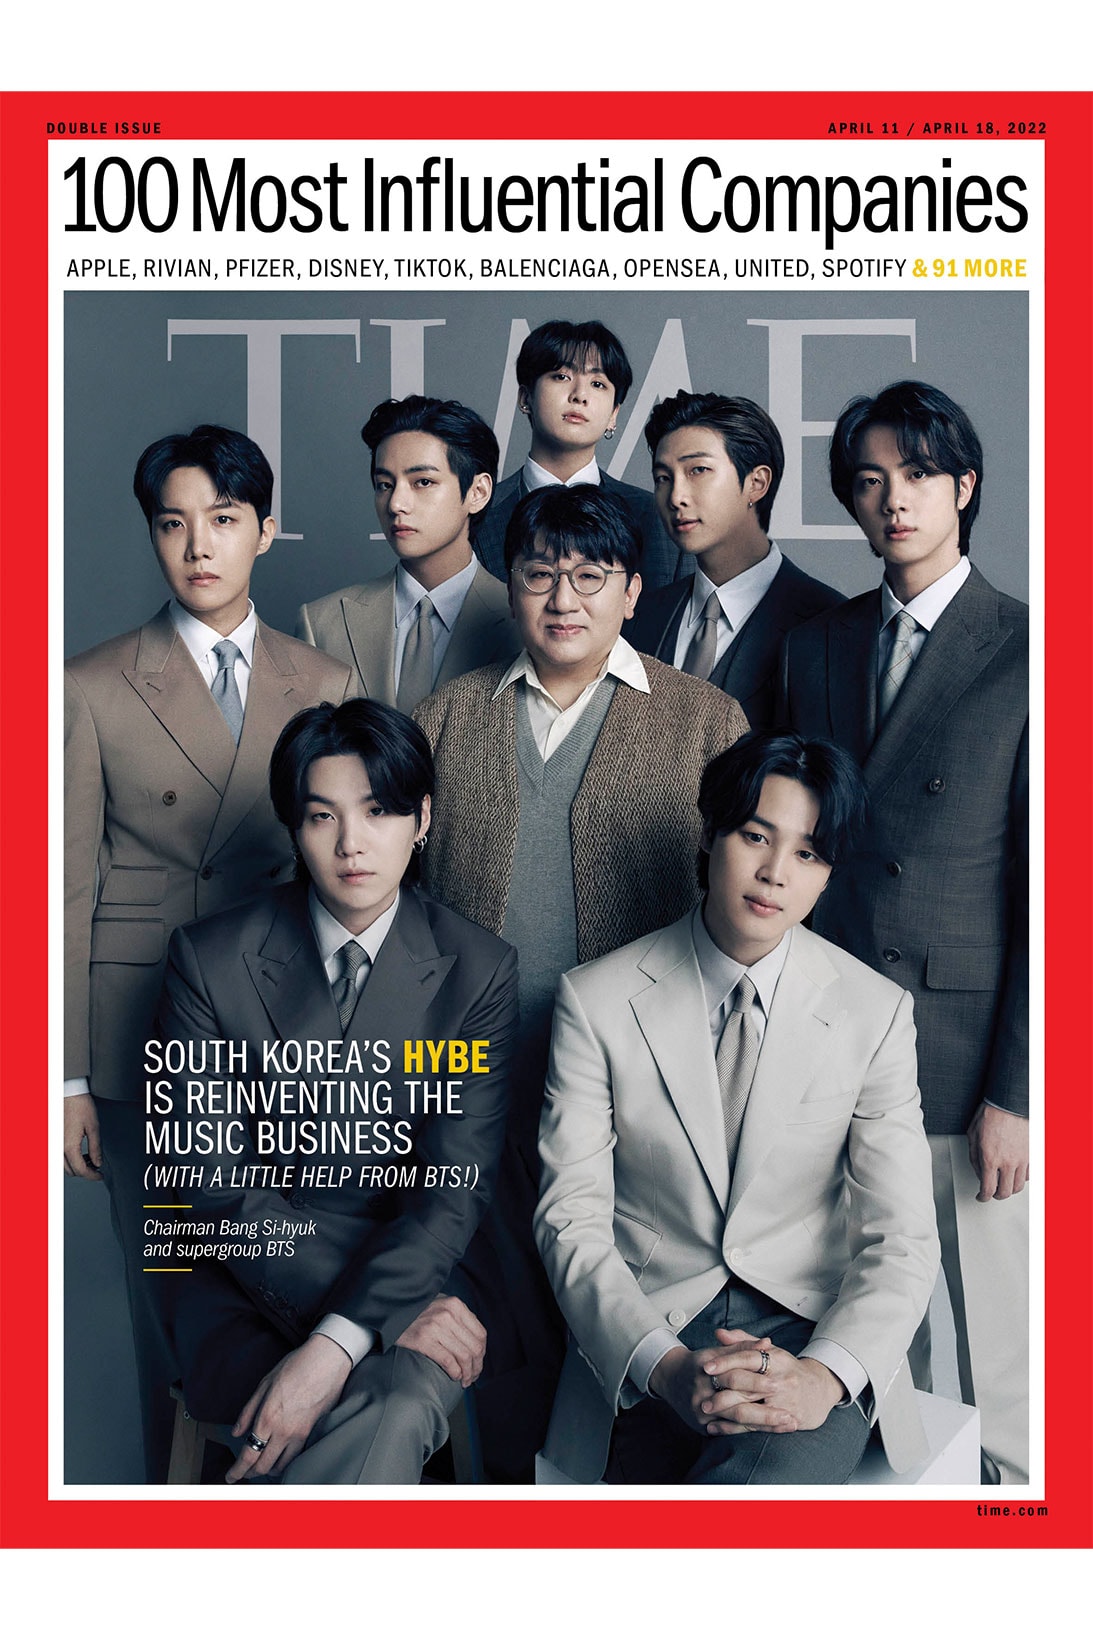 TIME 100 Most Influential Companies Cover HYBE Corporation BTS Bang Si hyuk